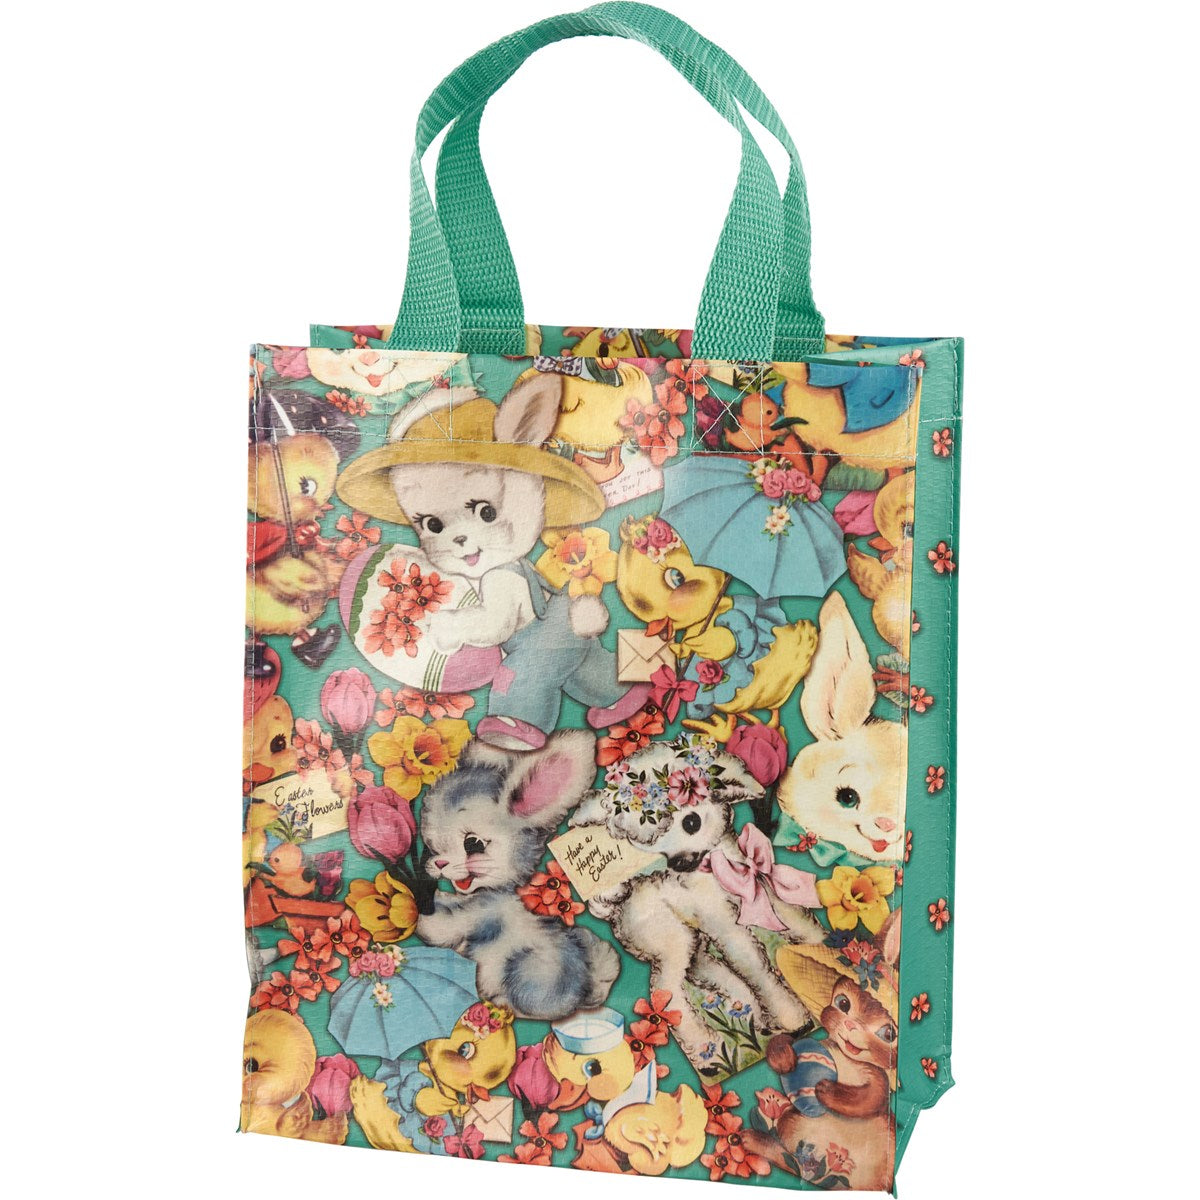 💙 Retro Easter Bunnies Lambs and Chicks Daily Reusable Market Tote